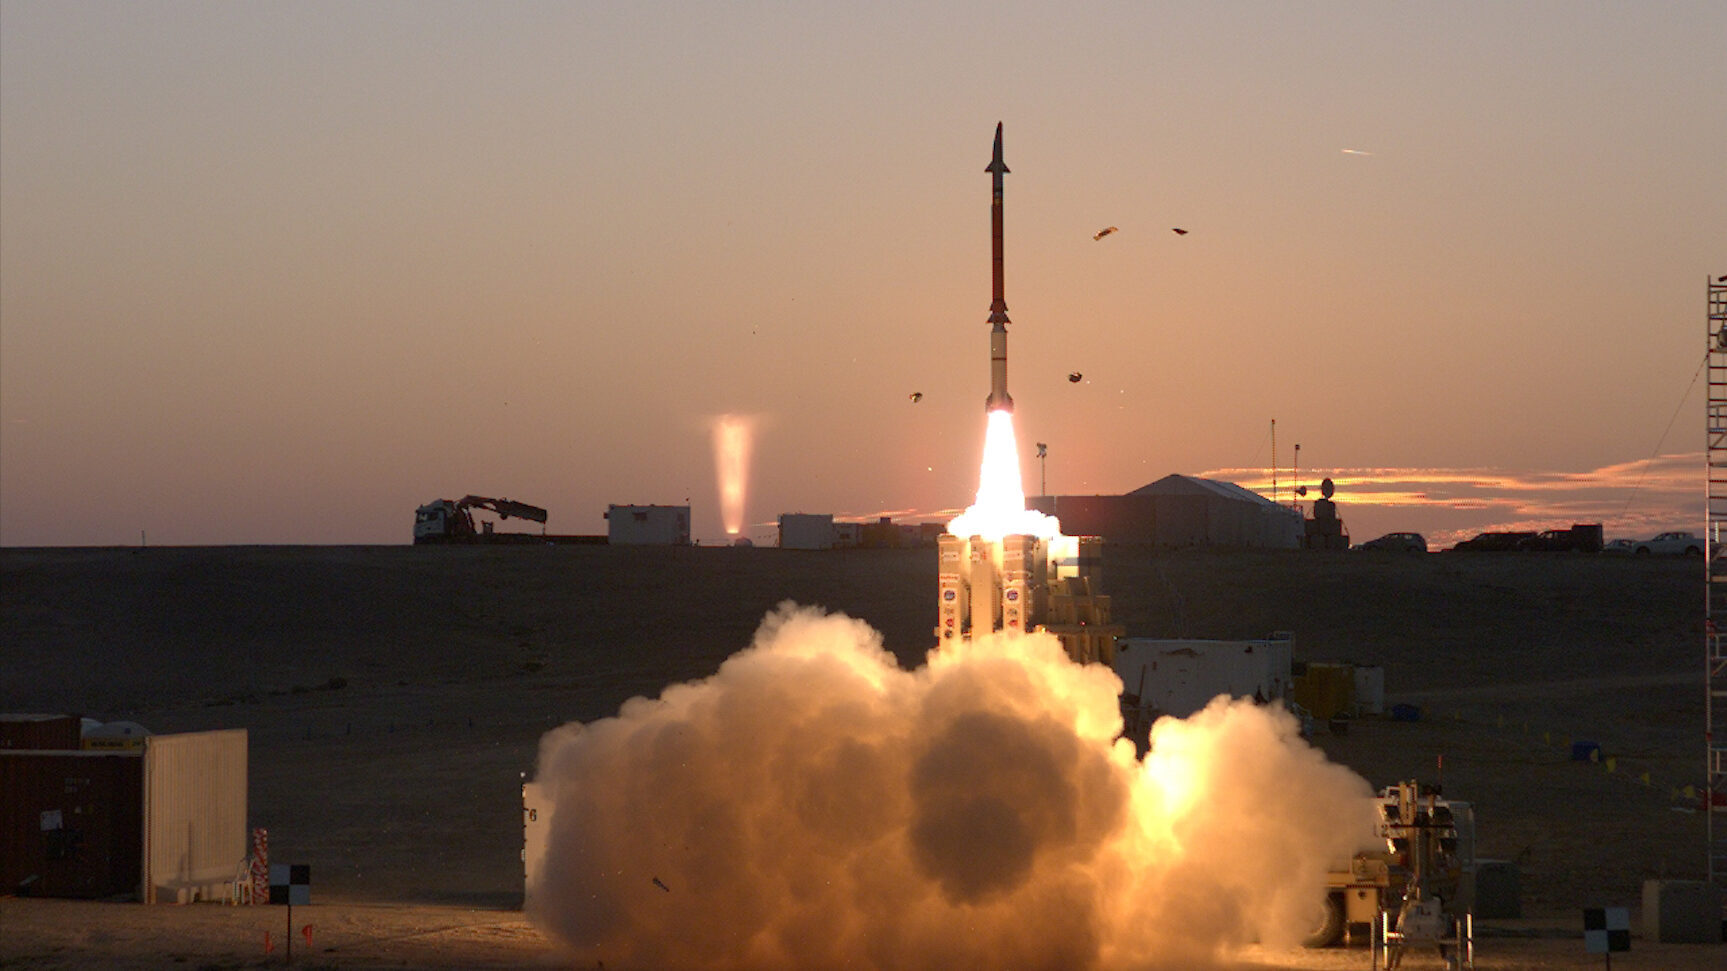 David’s Sling nets first live-action kill over Israeli skies